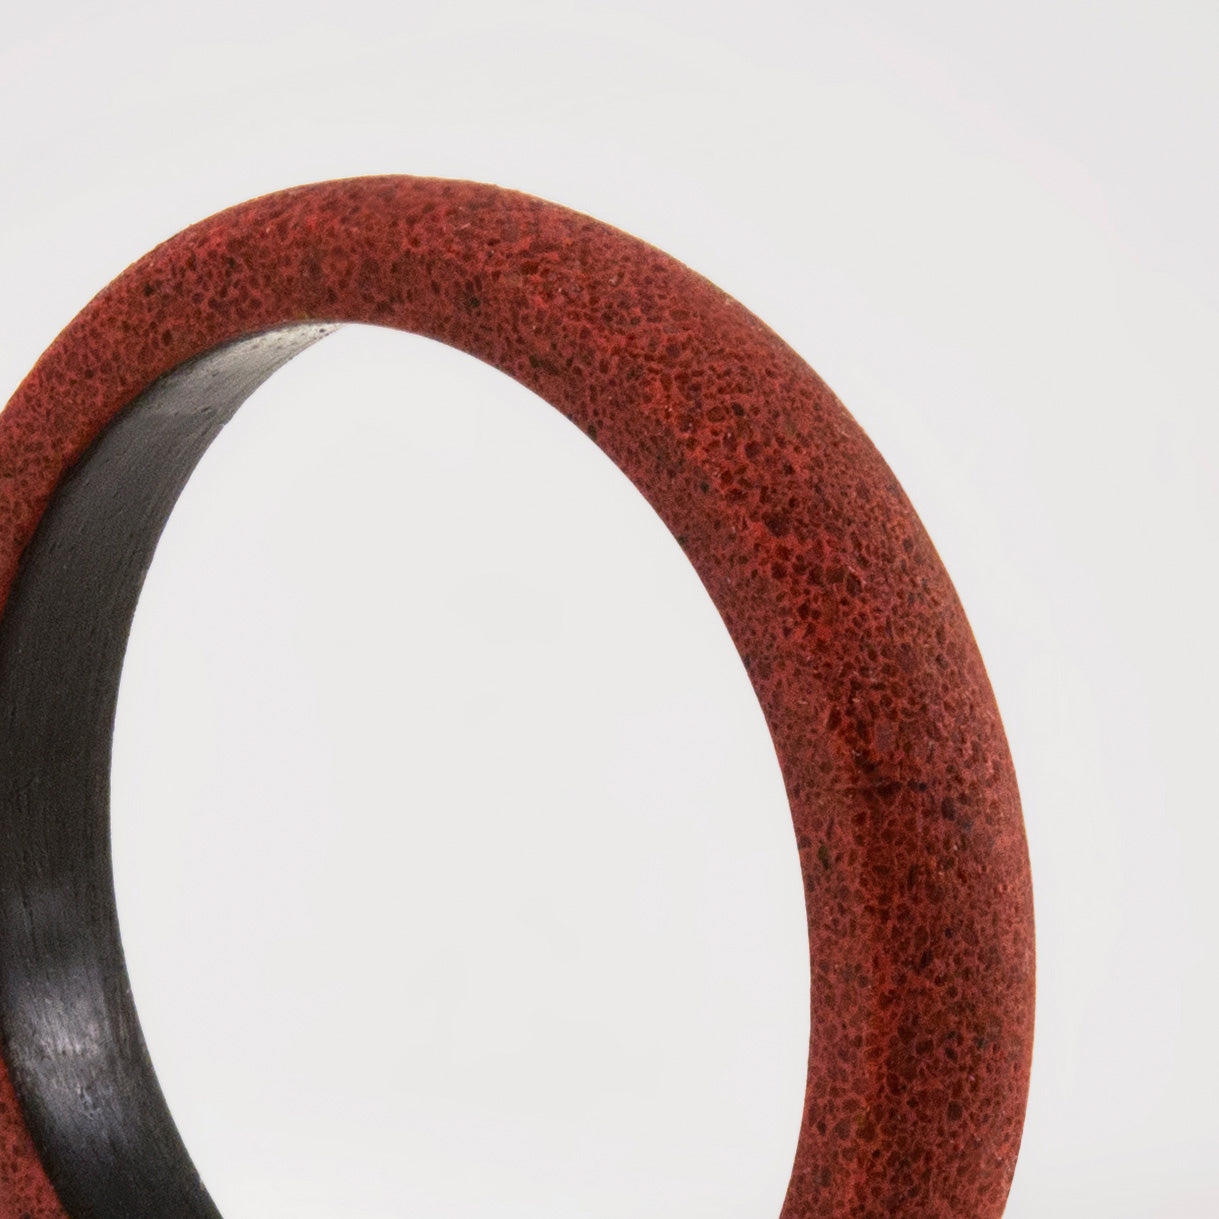 RED CONCRETE and CARBON FIBER ring